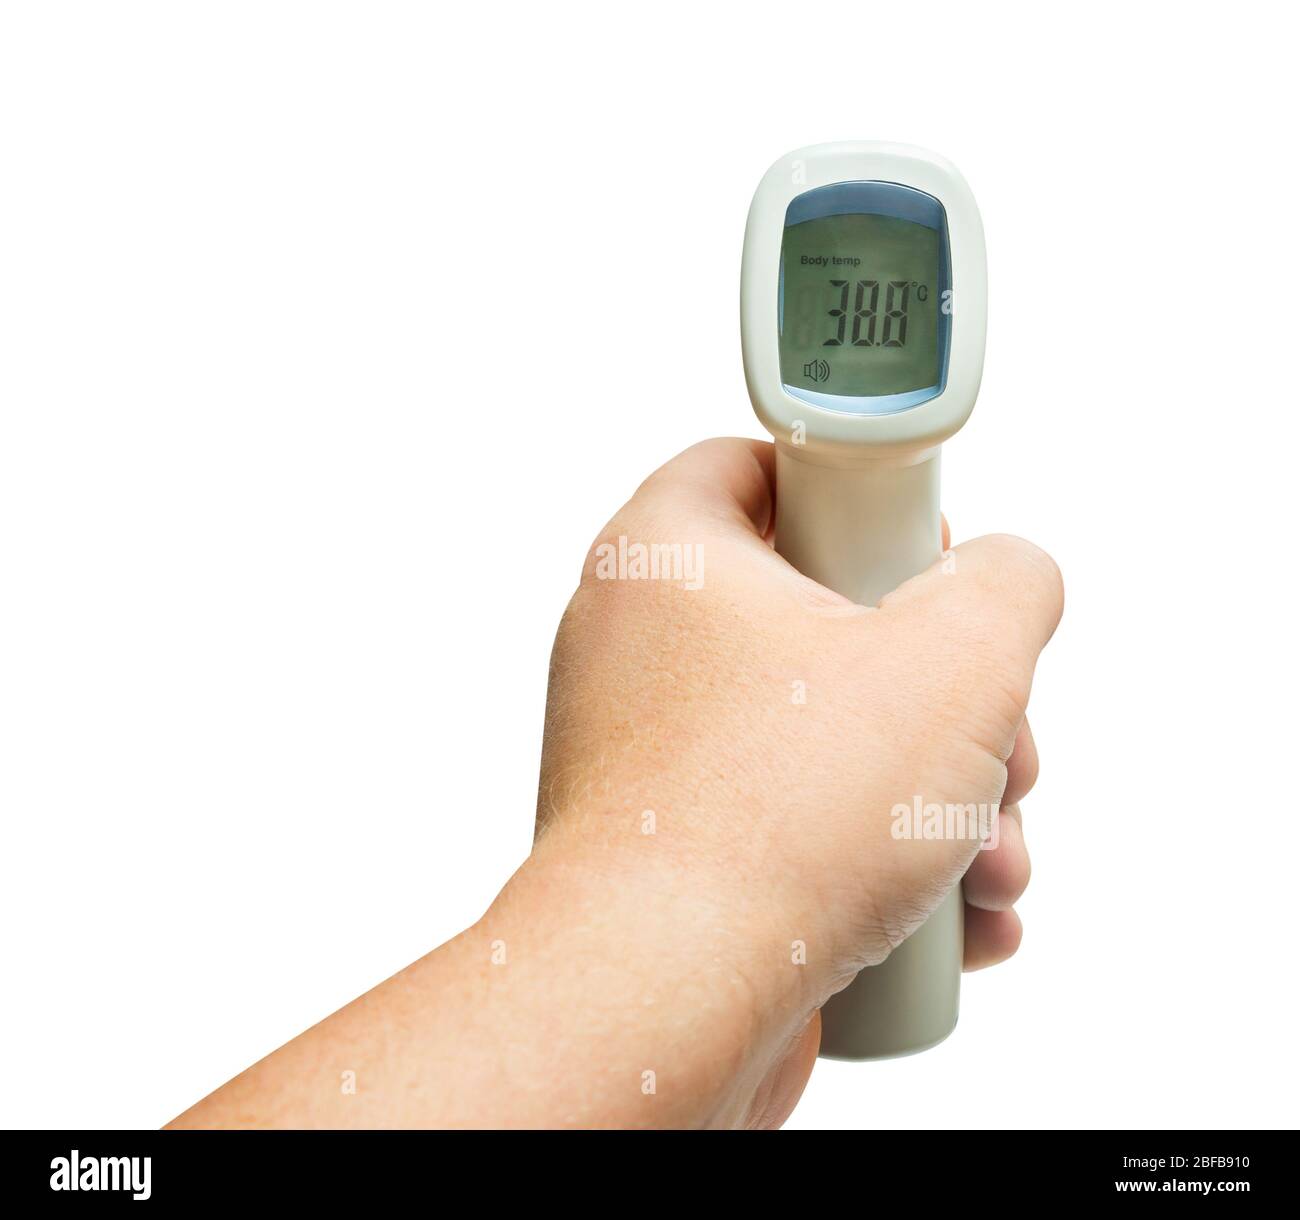 Very high dangerous fever Isometric Medical Infrared Thermometer Temperature  Measurement Device isolated on white background Stock Photo - Alamy